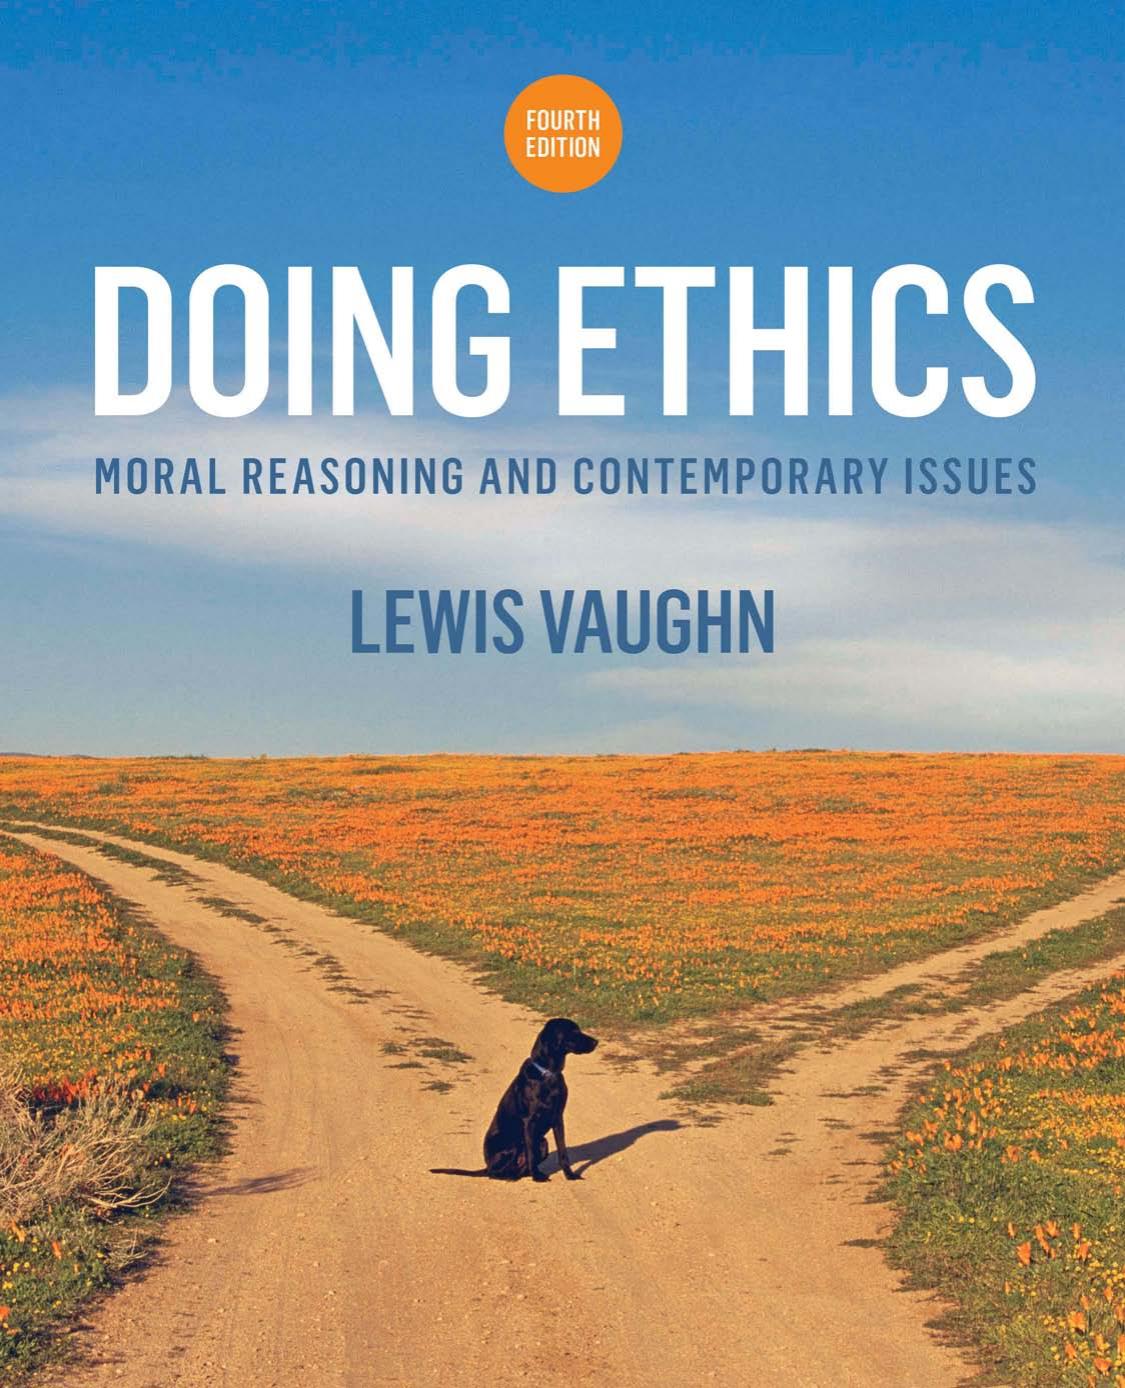 Doing Ethics Moral Reasoning and Contemporary Issues 4th Edition - Lewis Vaughn.jpg